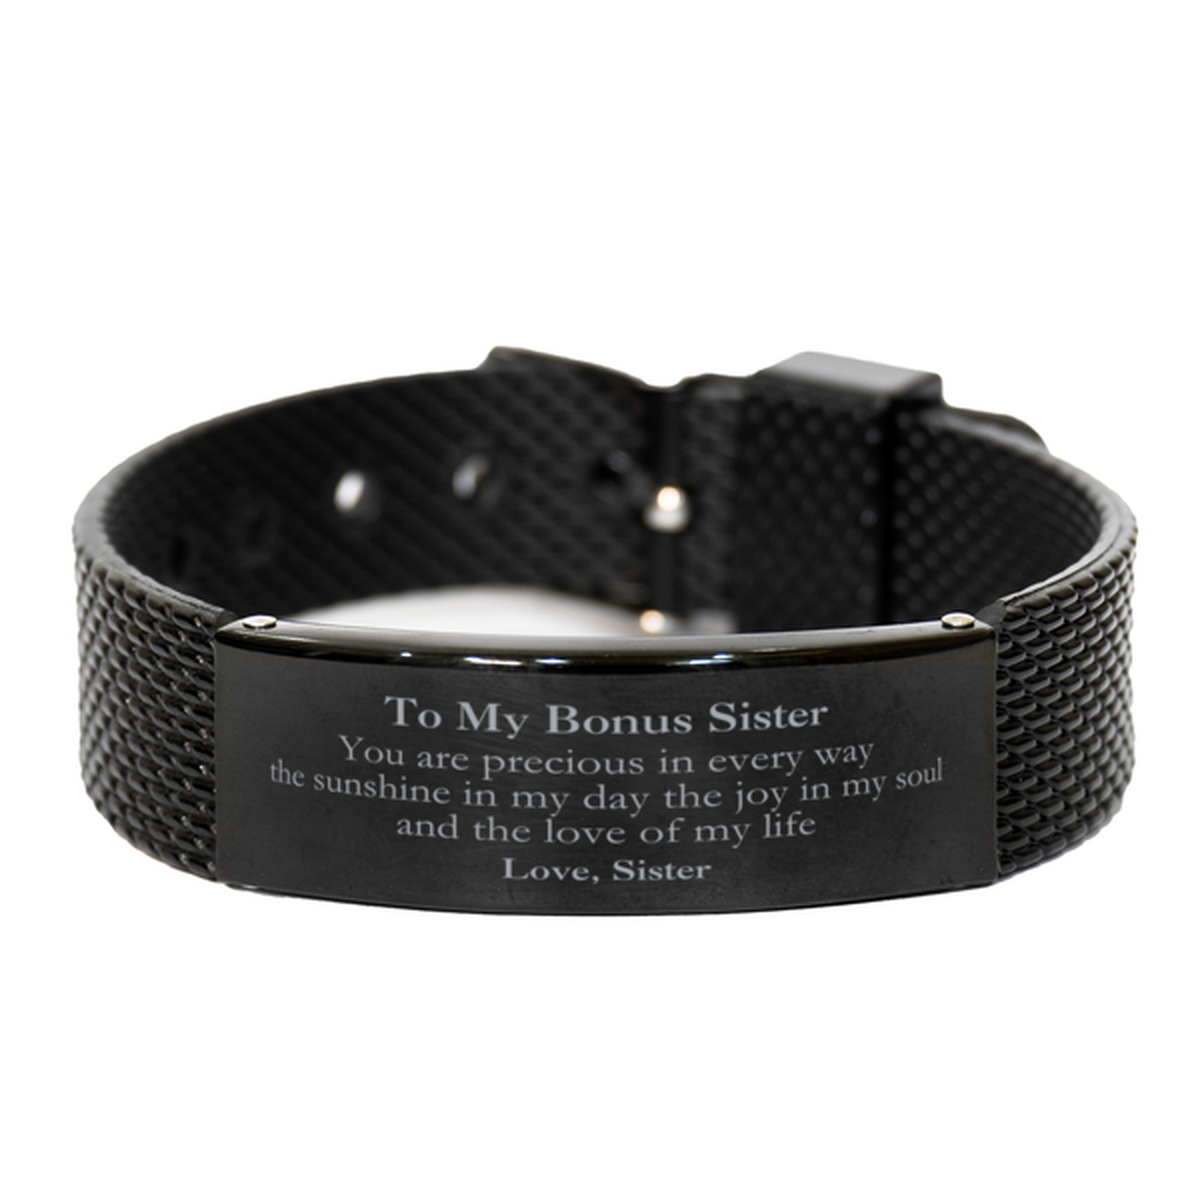 Graduation Gifts for Bonus Sister Black Shark Mesh Bracelet Present from Sister, Christmas Bonus Sister Birthday Gifts Bonus Sister You are precious in every way the sunshine in my day. Love, Sister